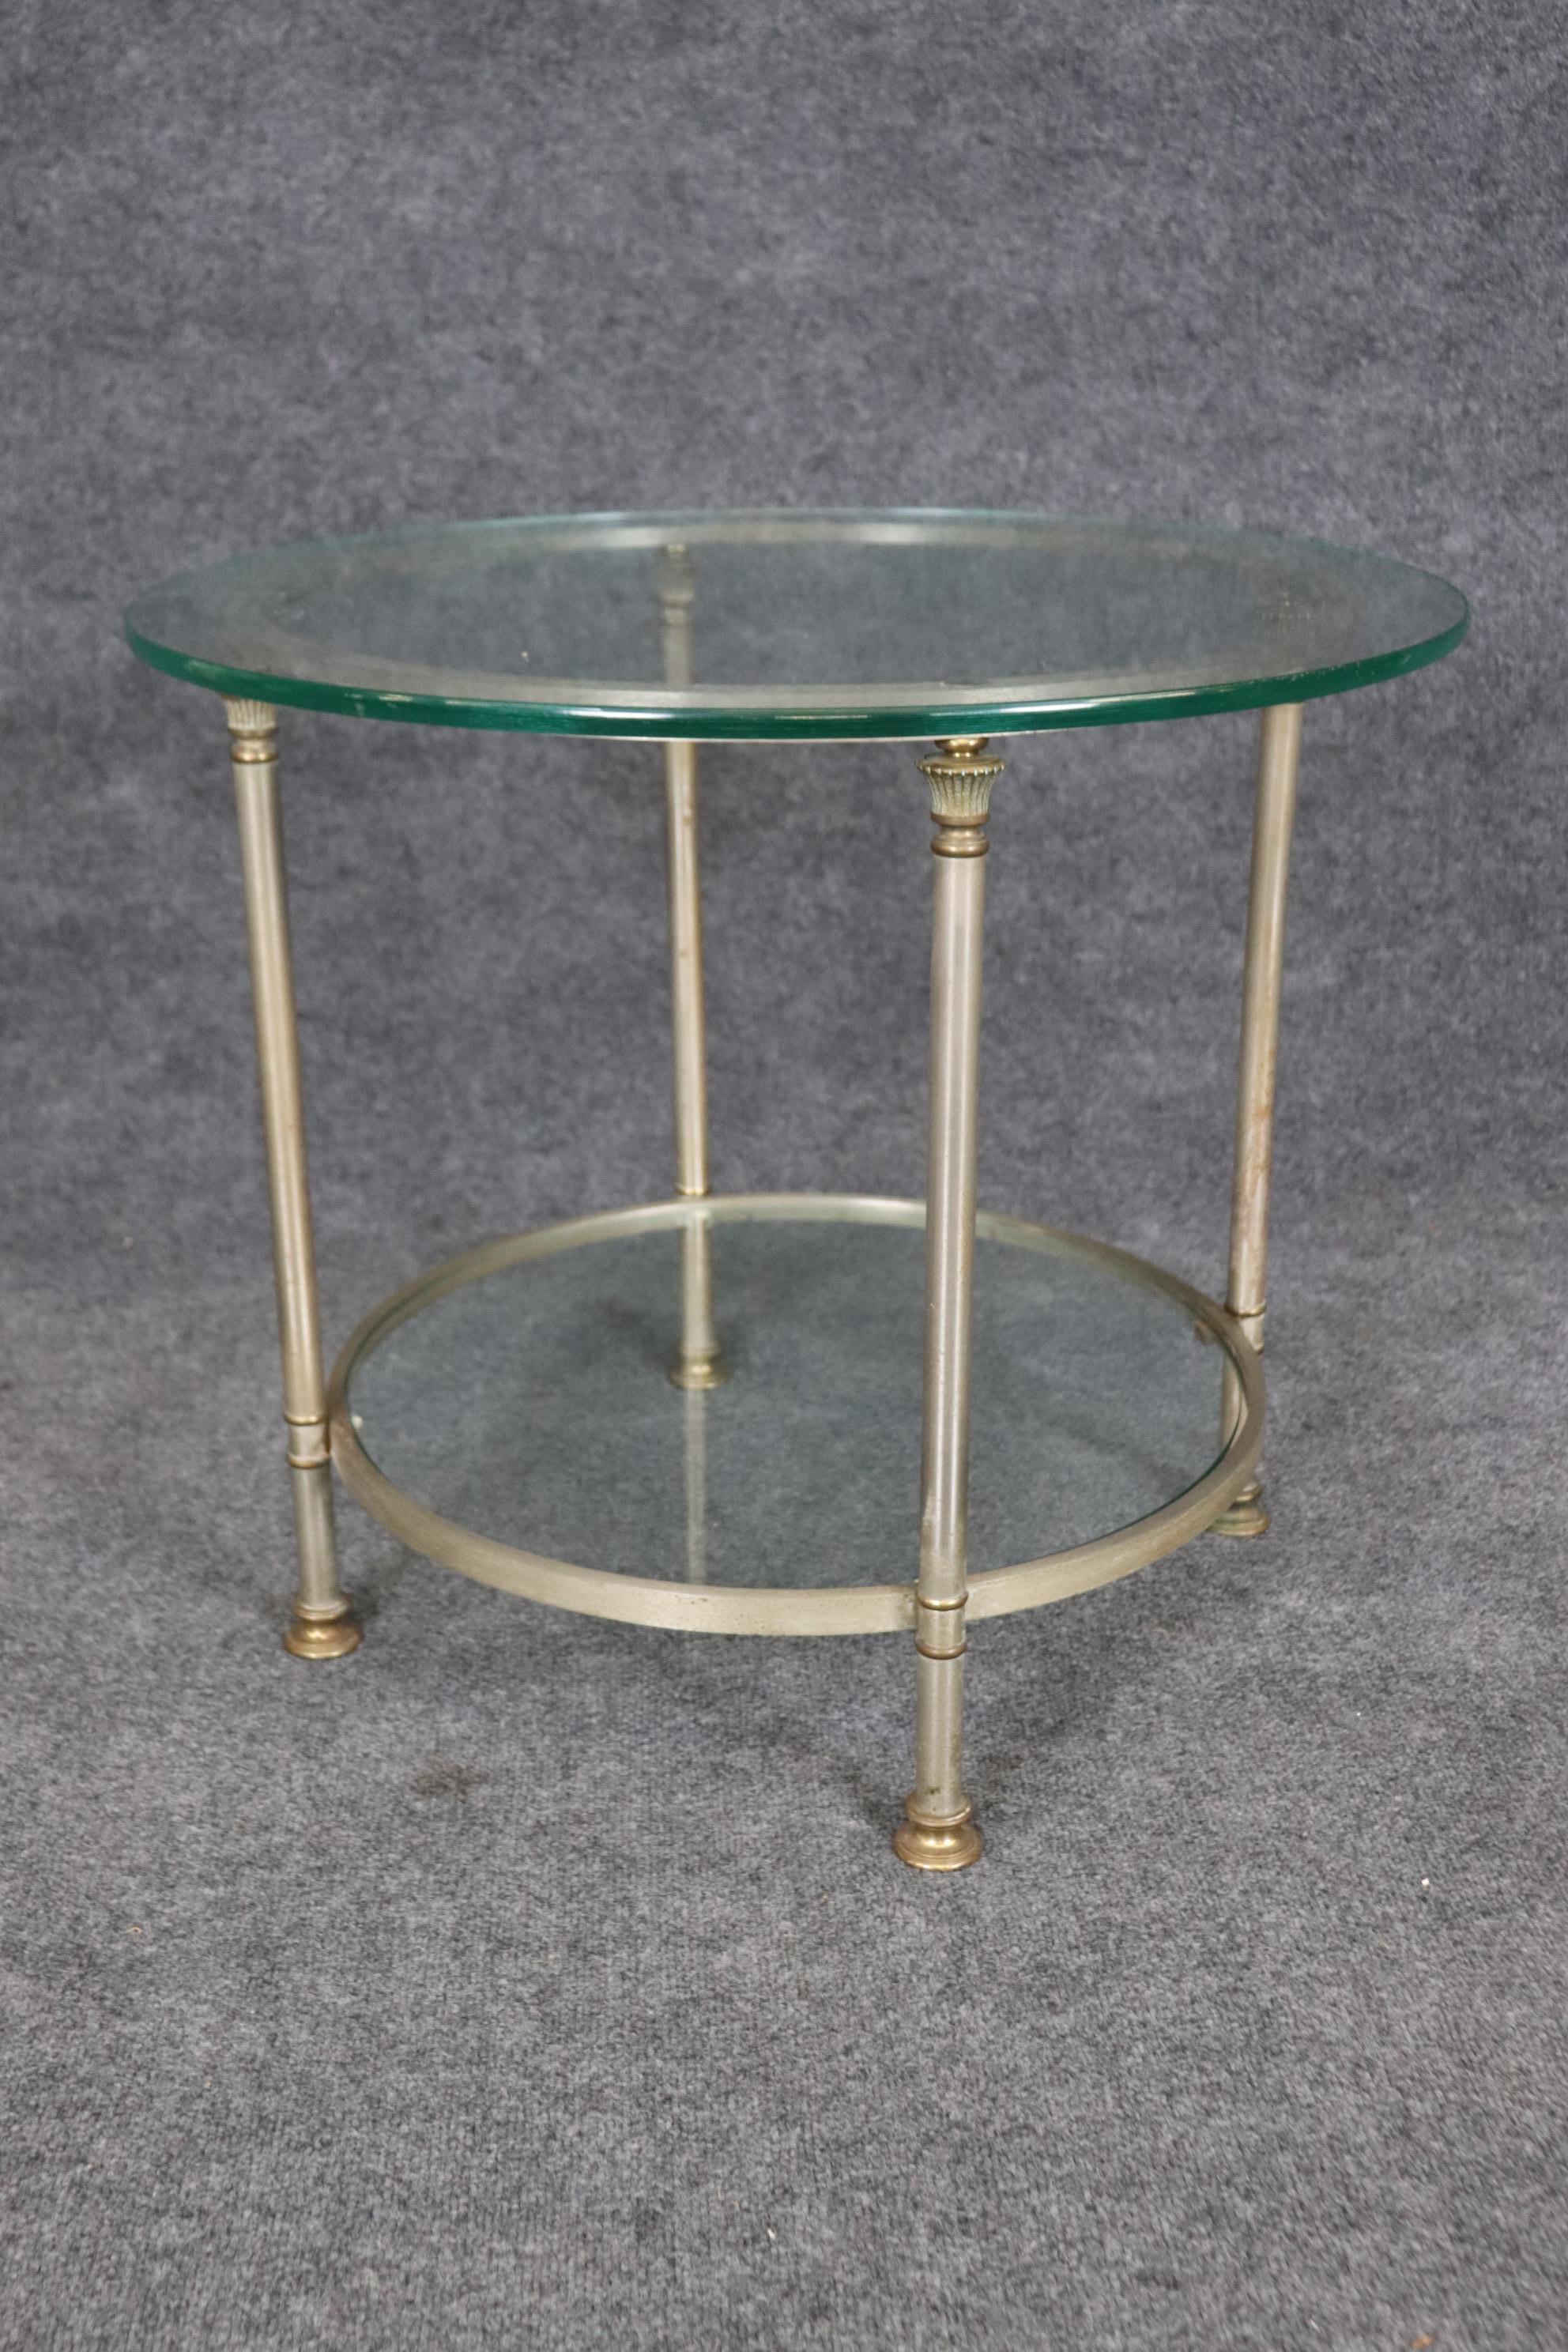 Single Steel and Glass Maison Jansen Round End Table Circa 1950s In Good Condition For Sale In Swedesboro, NJ